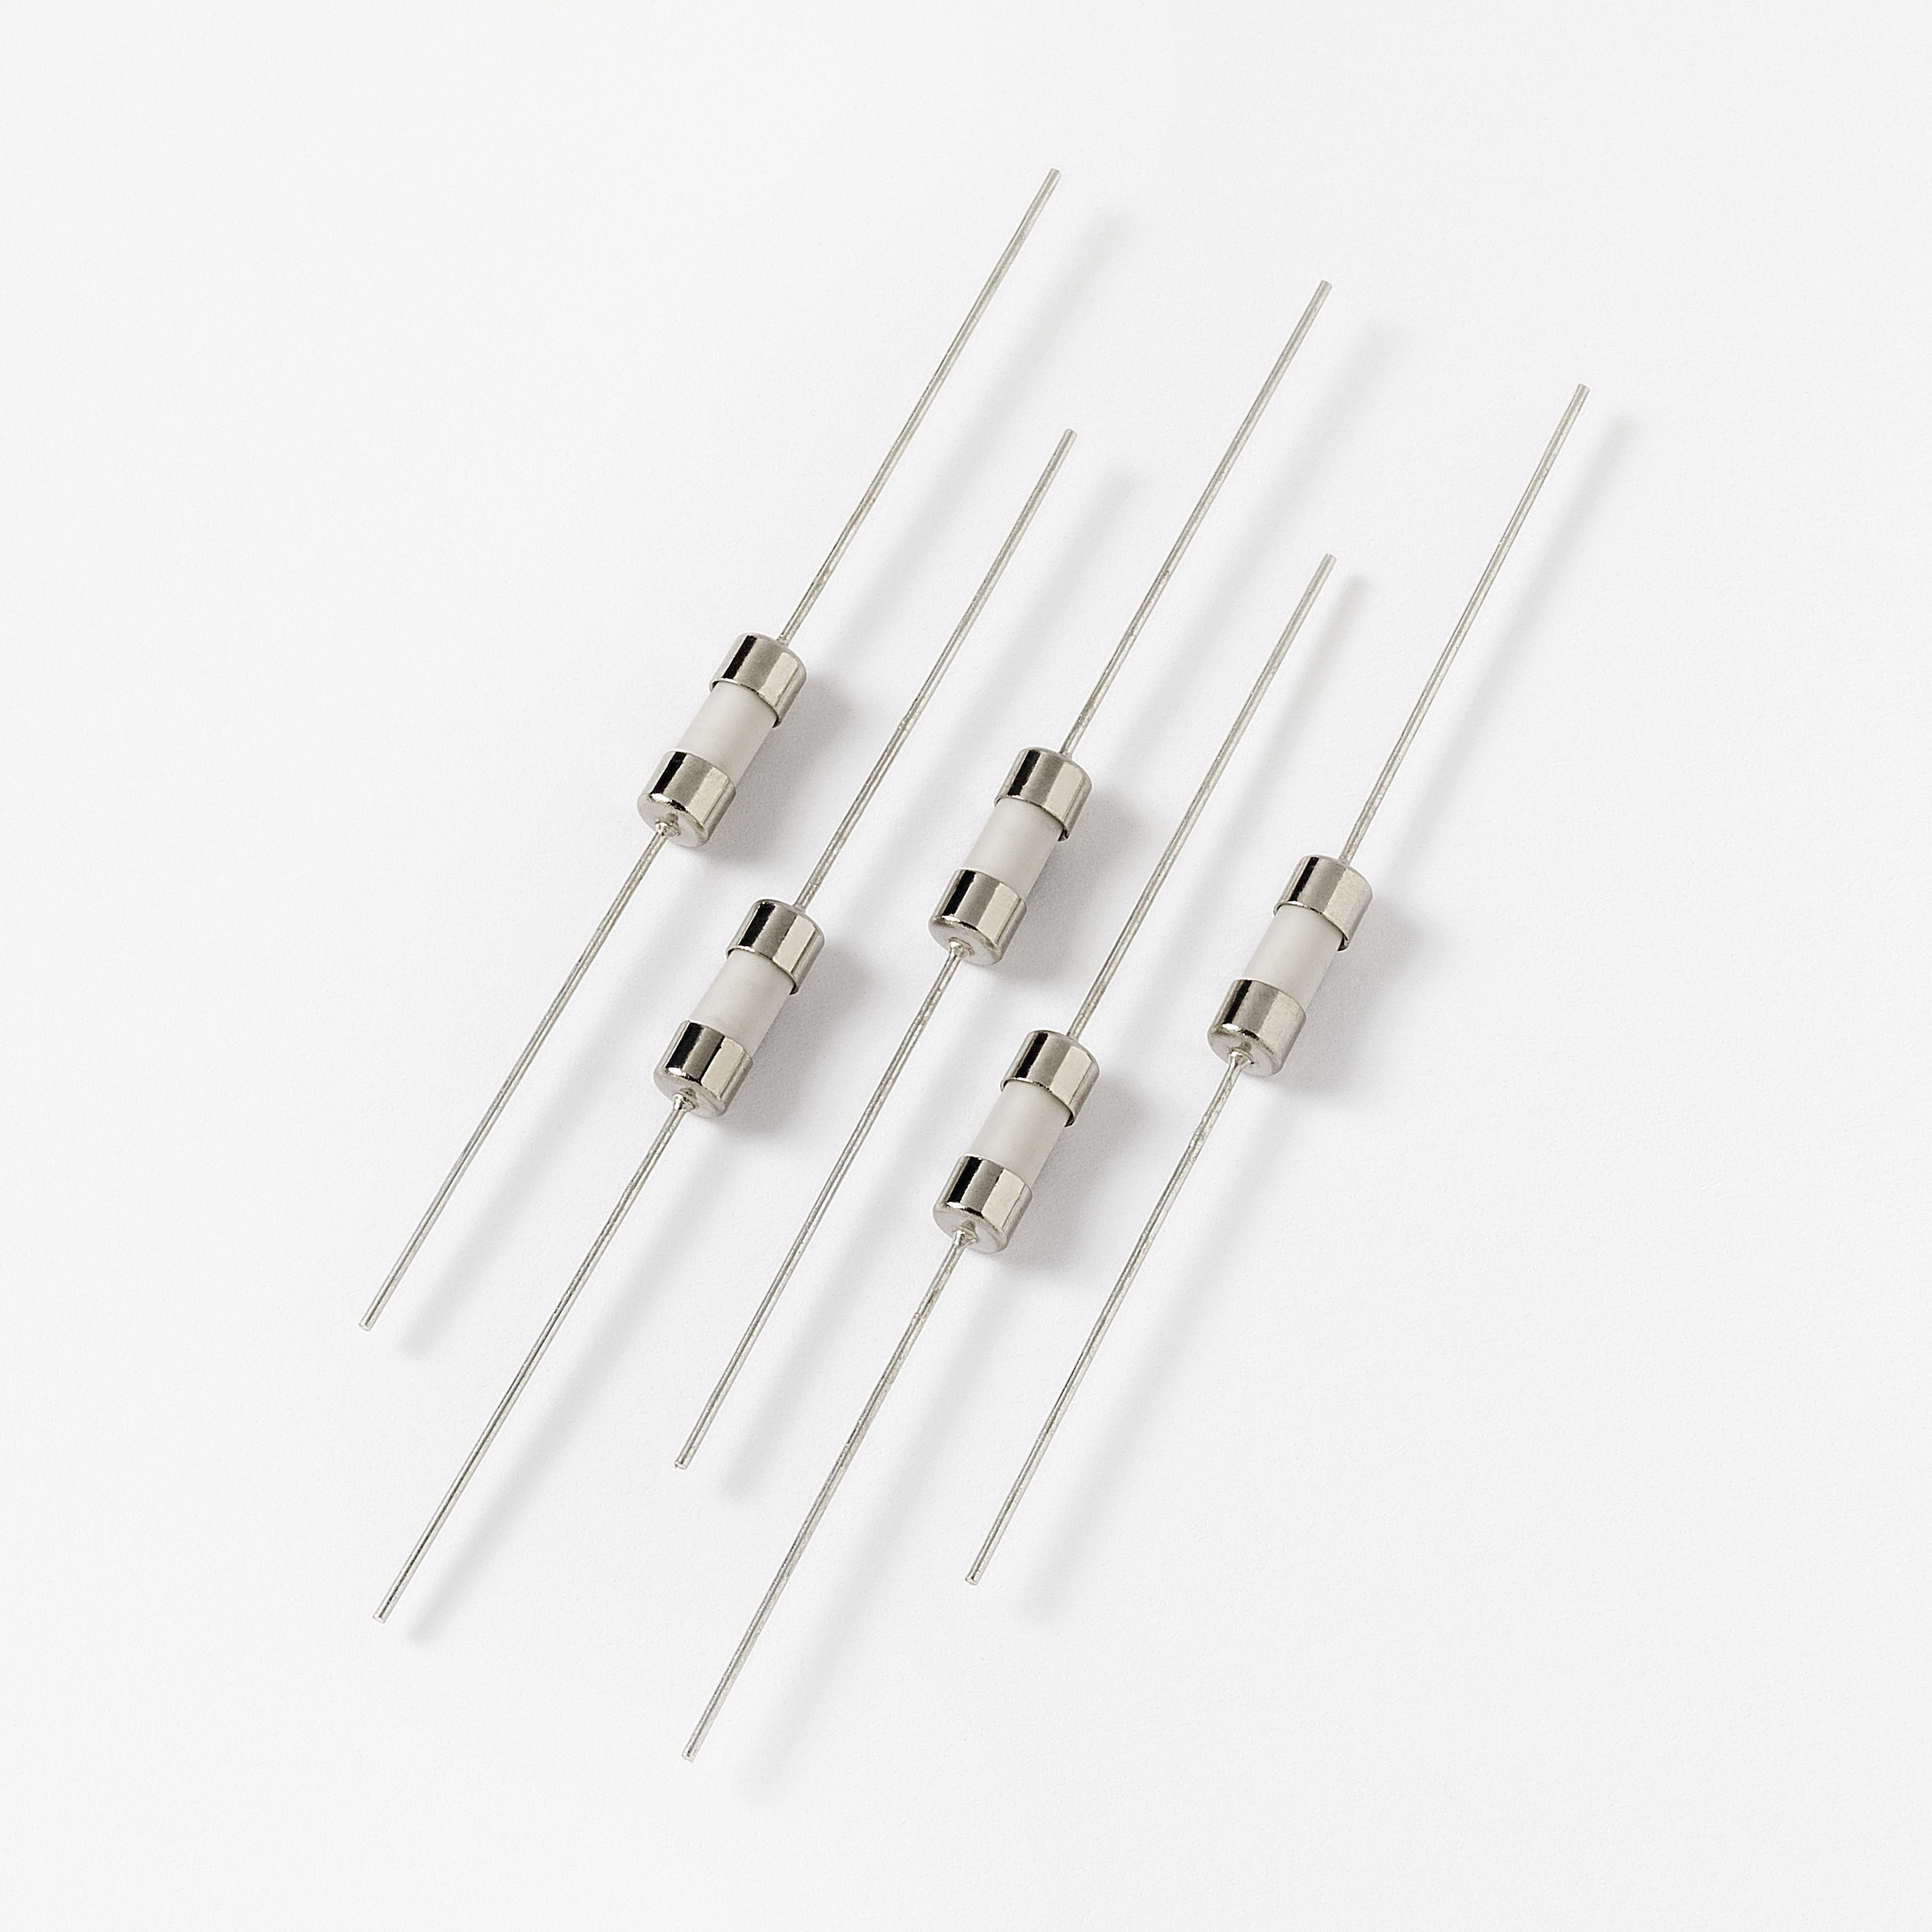 Details about   10pcs Ceramic Tube Fuse Axial Leads 3.6*10mm 5A Slow Blow 2.U 